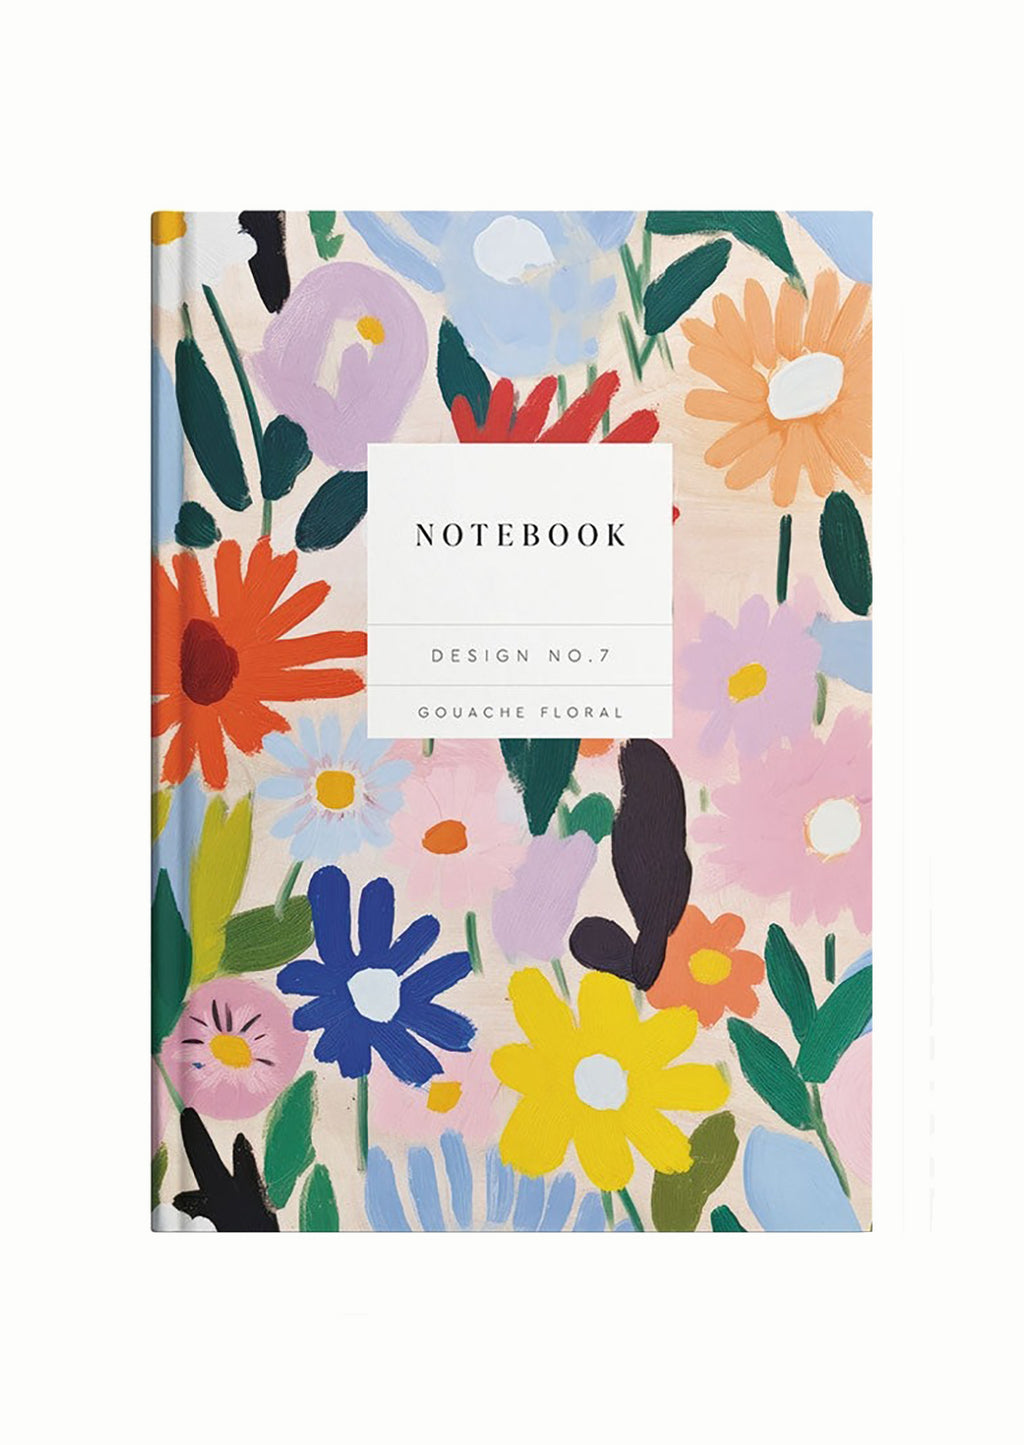 Gouache Floral: A hardcover notebook with floral print cover.